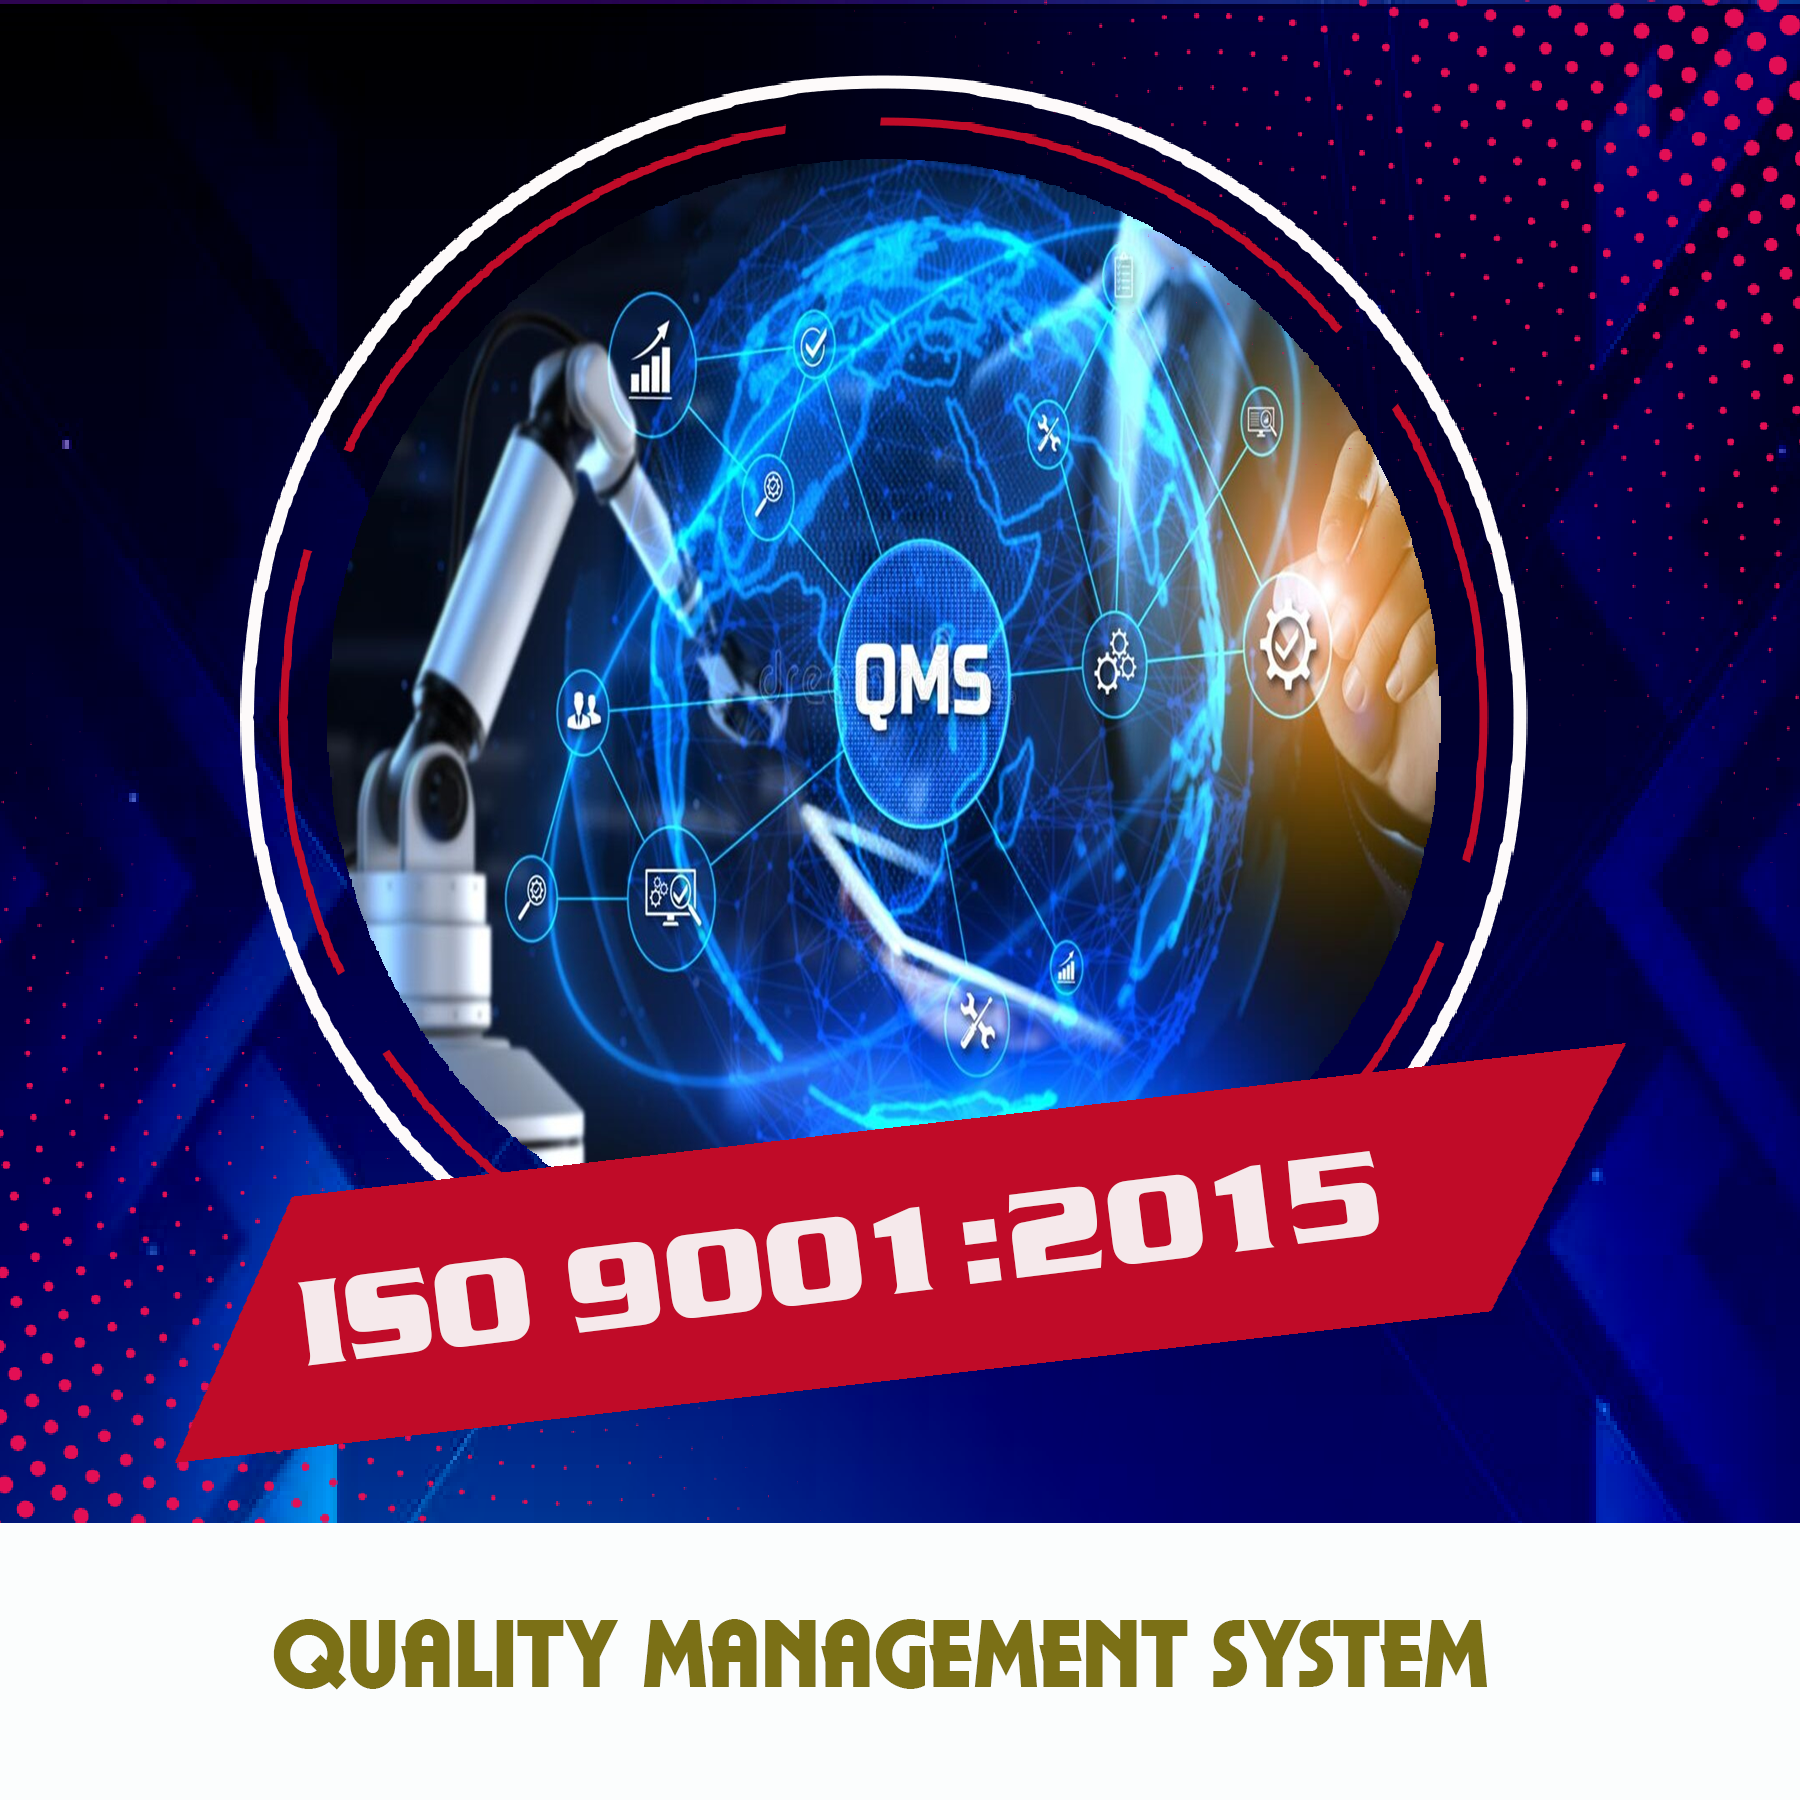 Benefits of Quality Management System - ISO 9001:2015 